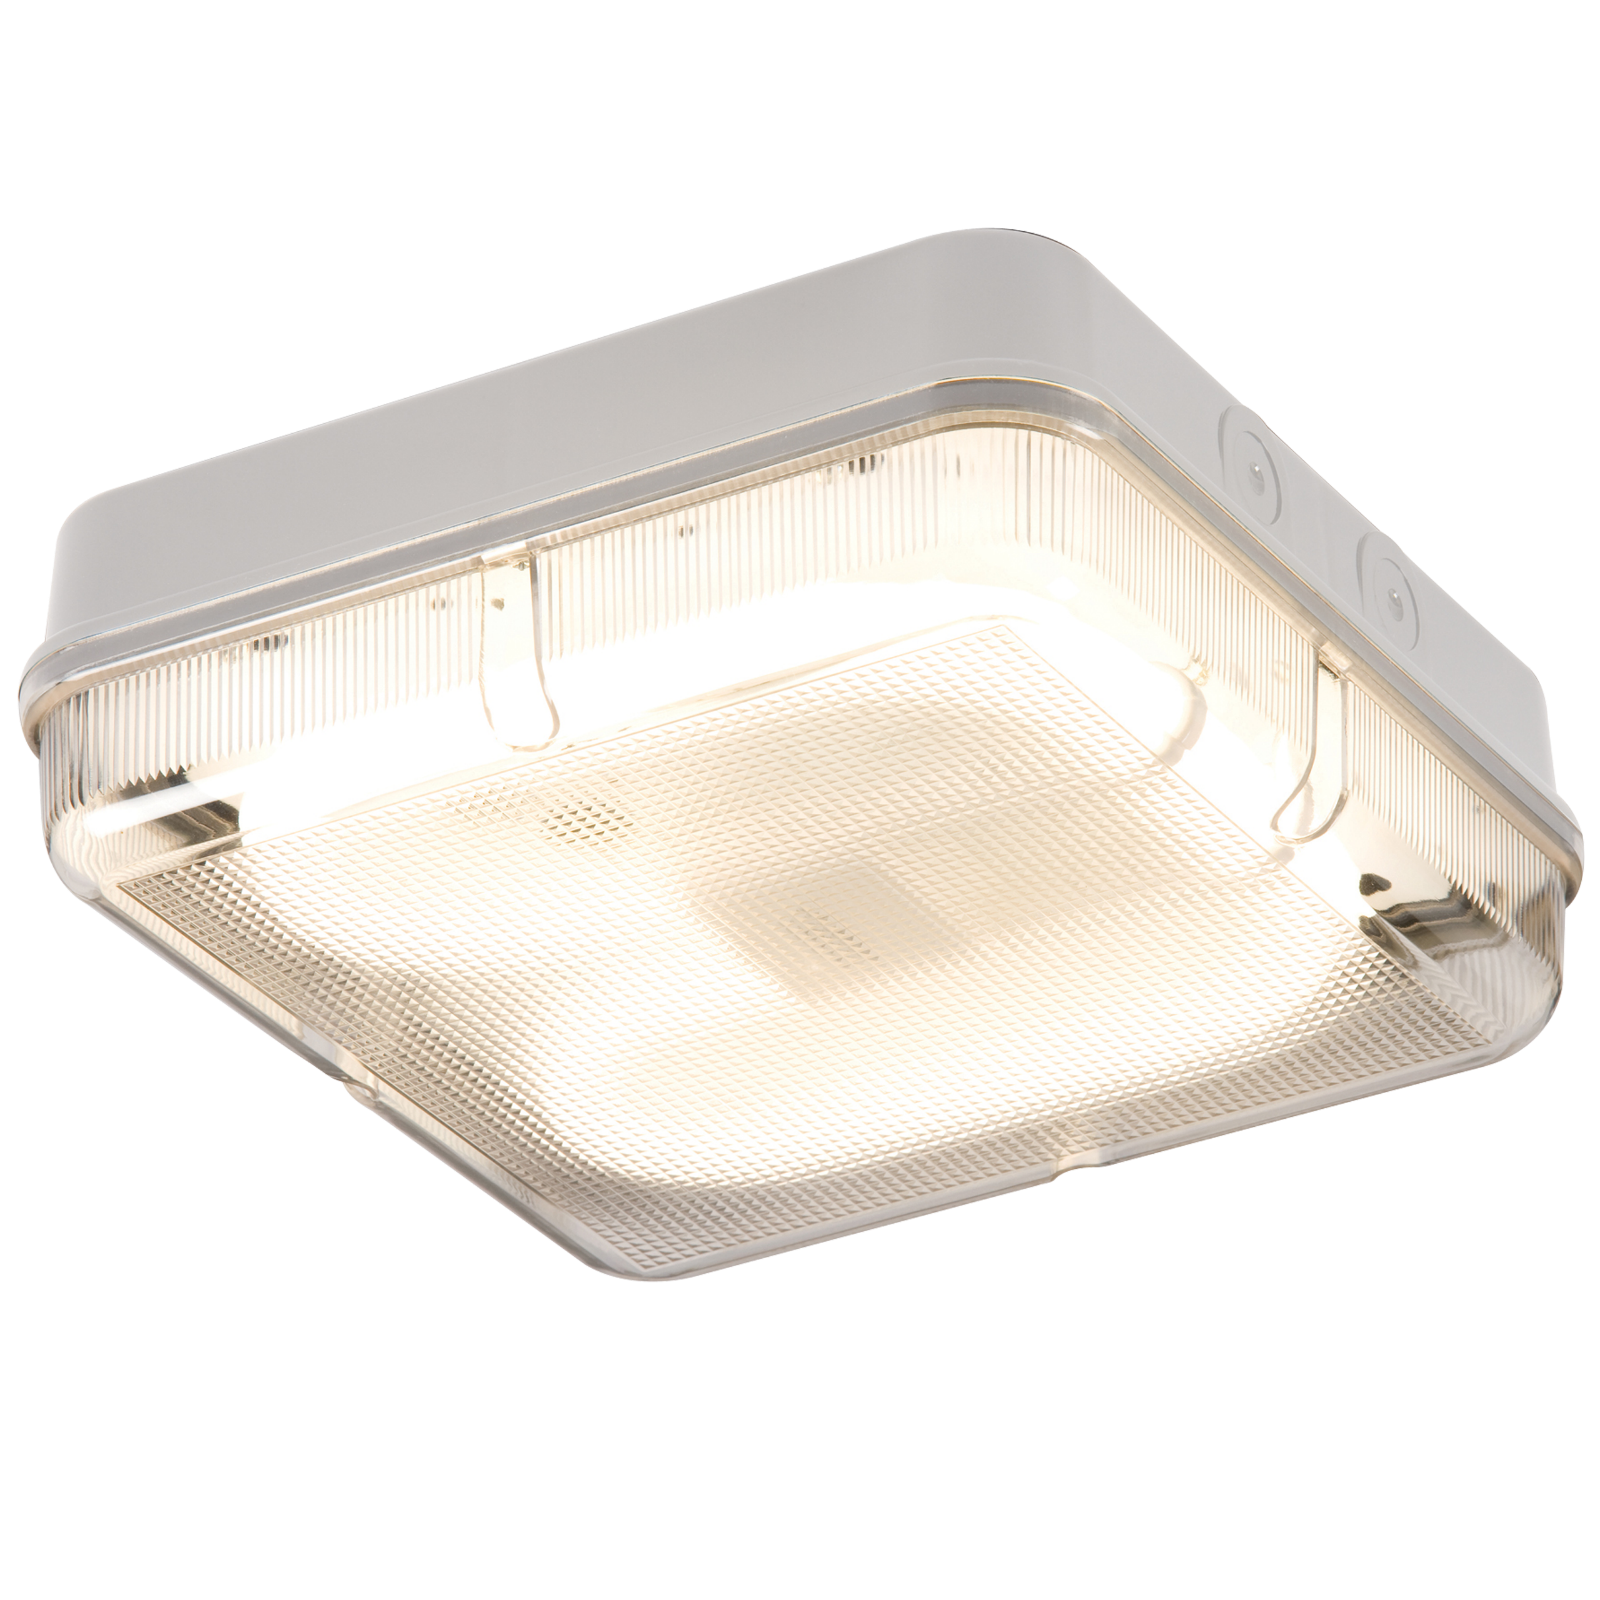 IP65 28W HF Square Emergency Bulkhead With Prismatic Diffuser And White Base - TPS28WPEMHF 